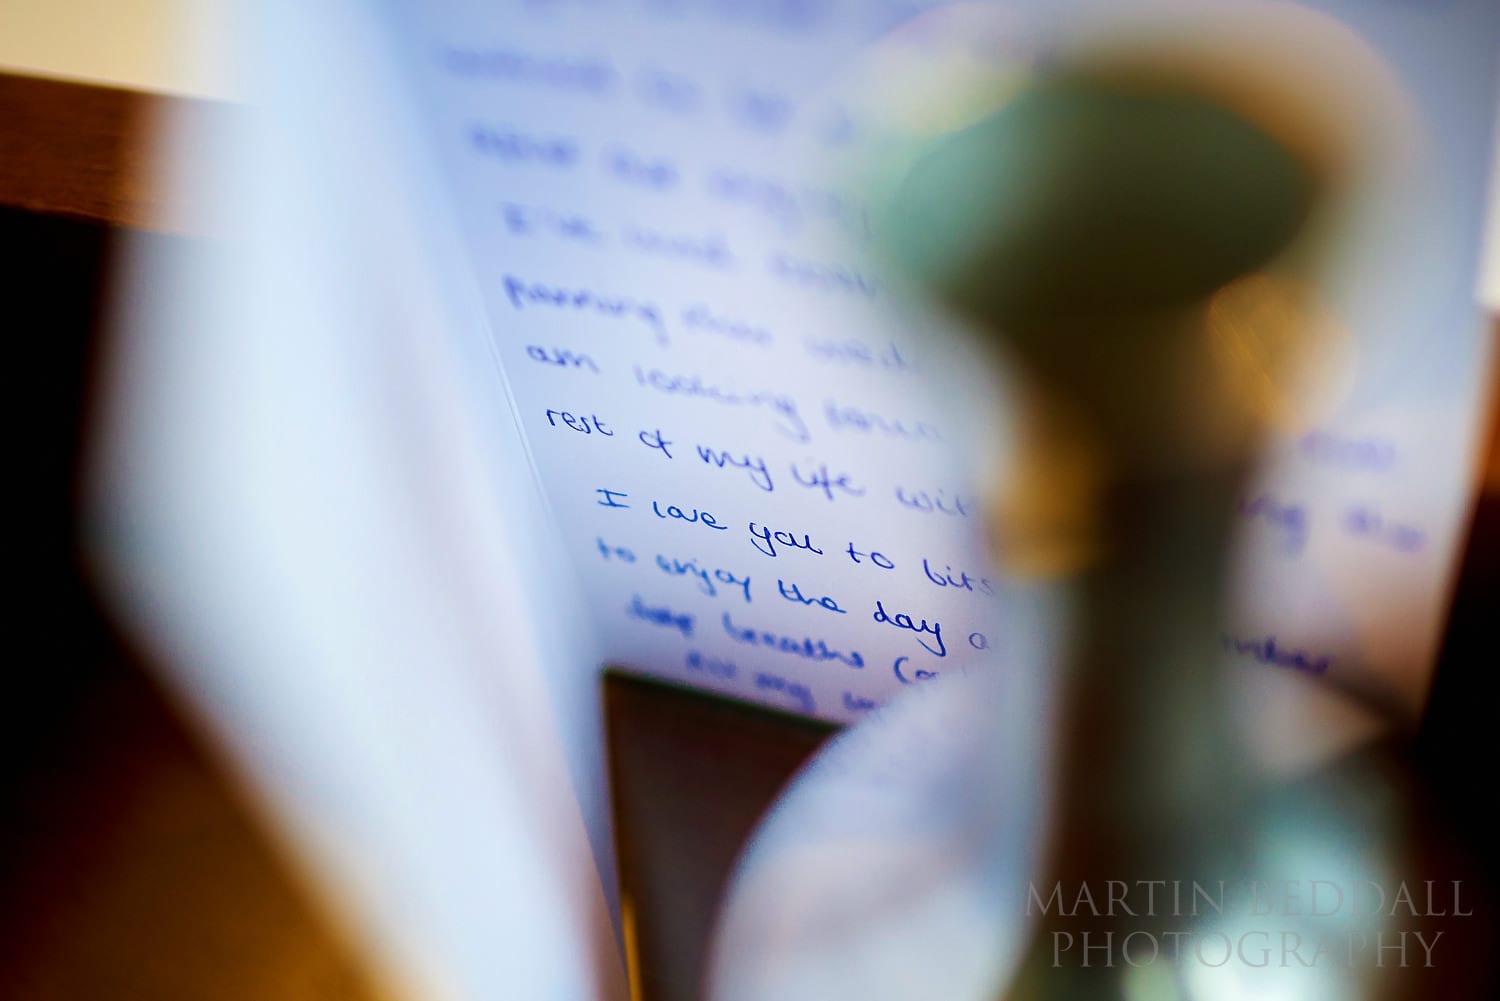 Note from the groom to his bride